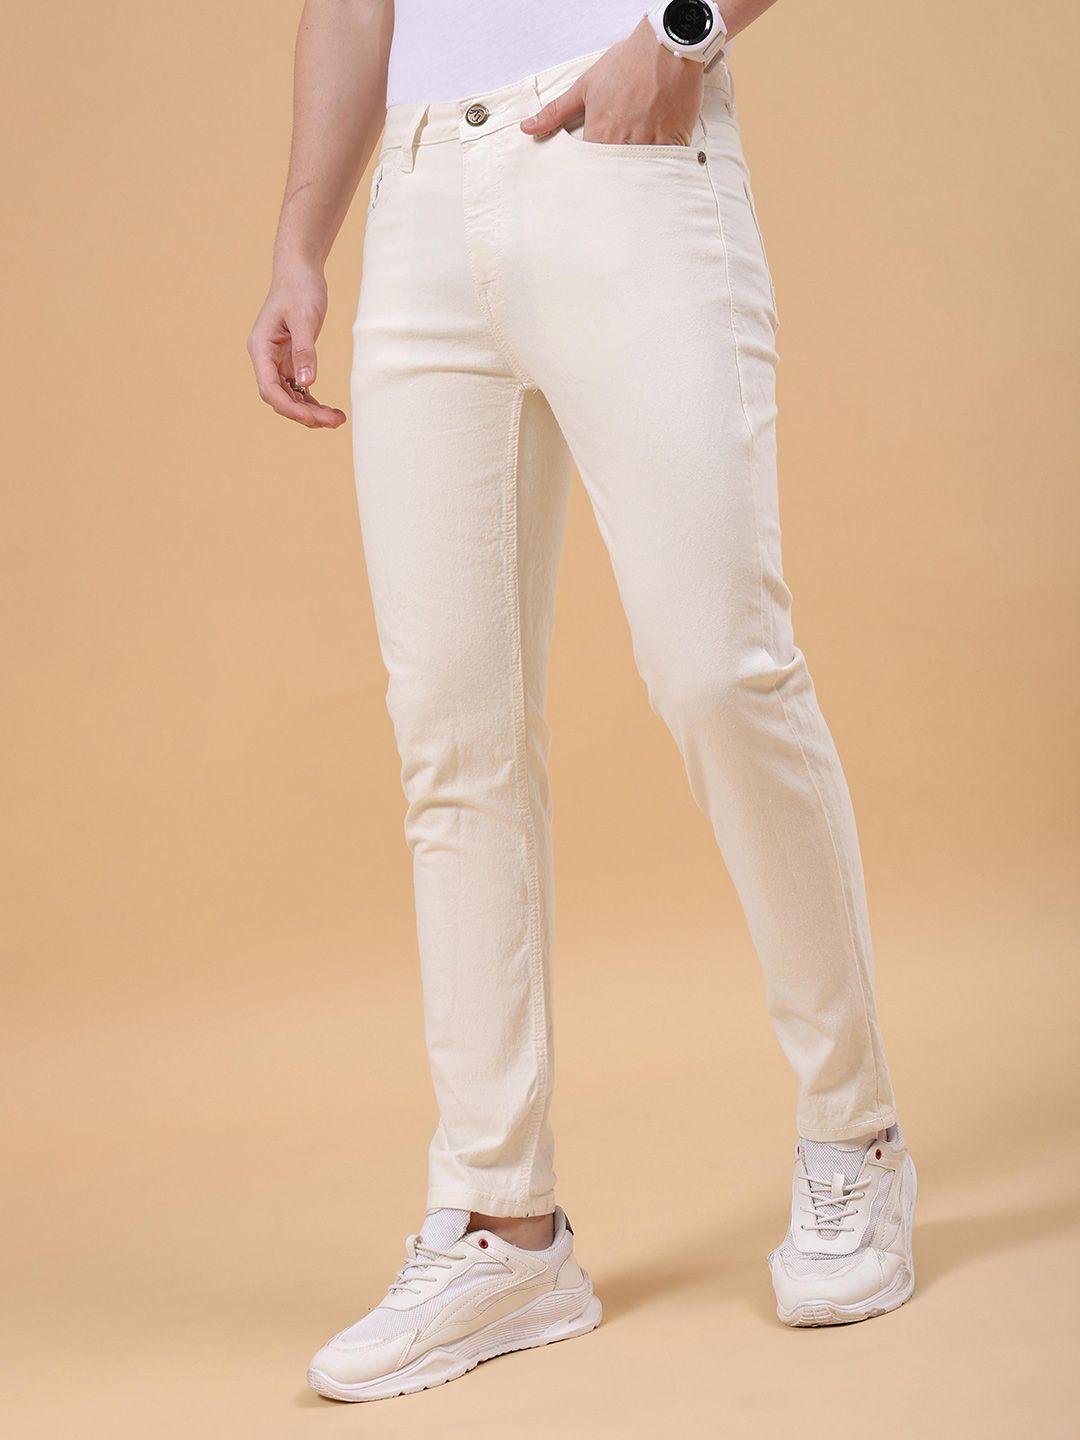 the-indian-garage-co-men-off-white-slim-fit-clean-look-stretchable-jeans